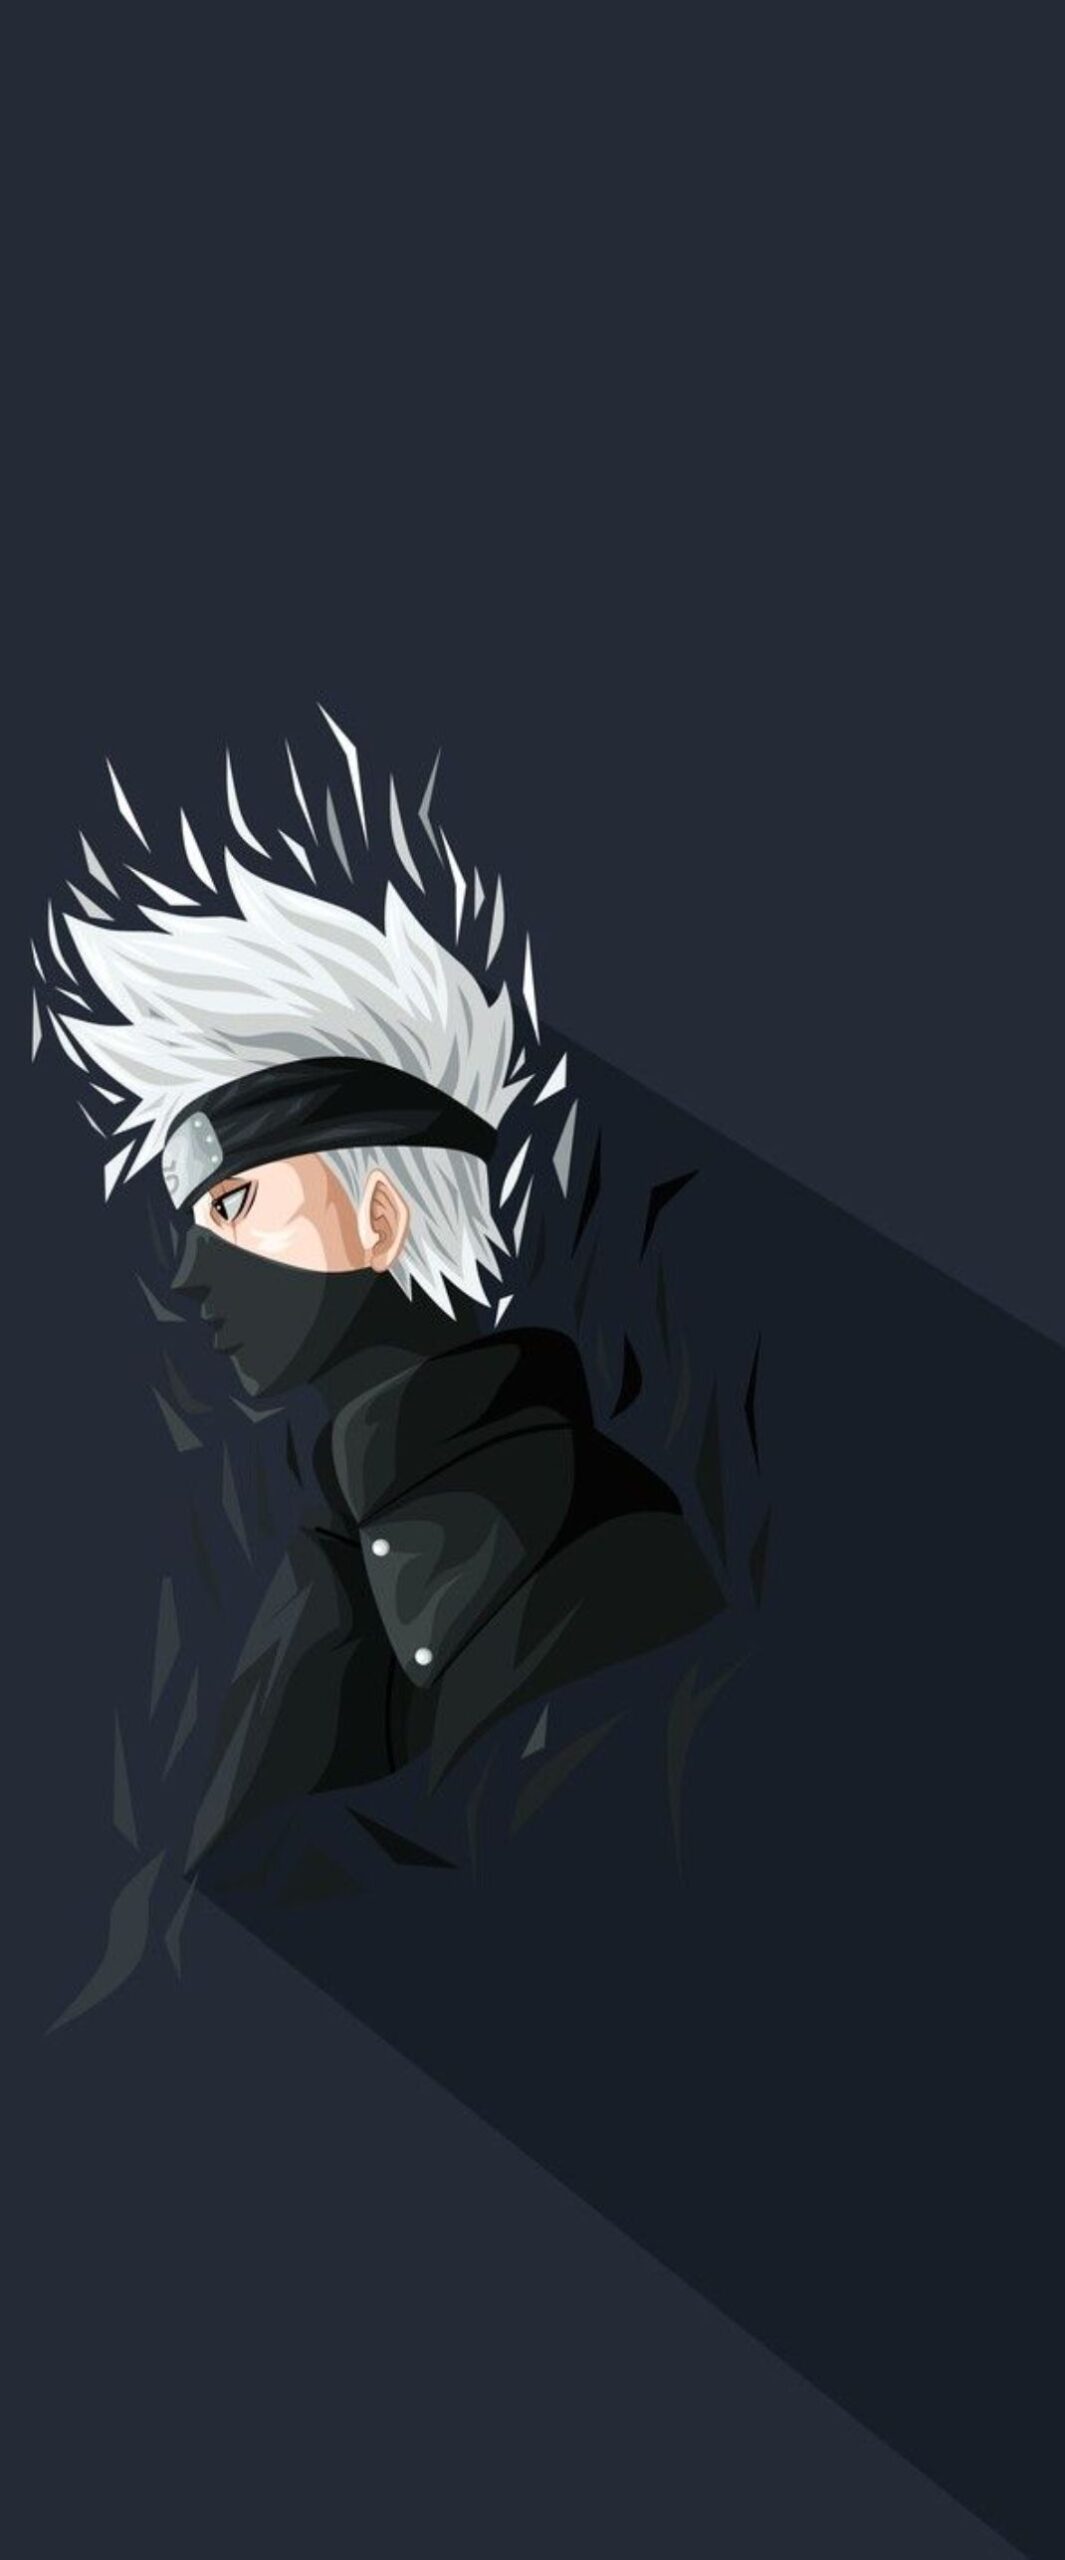 Top 25 Best Naruto Shippuden iPhone Wallpapers [ 4k & HD Quality ]